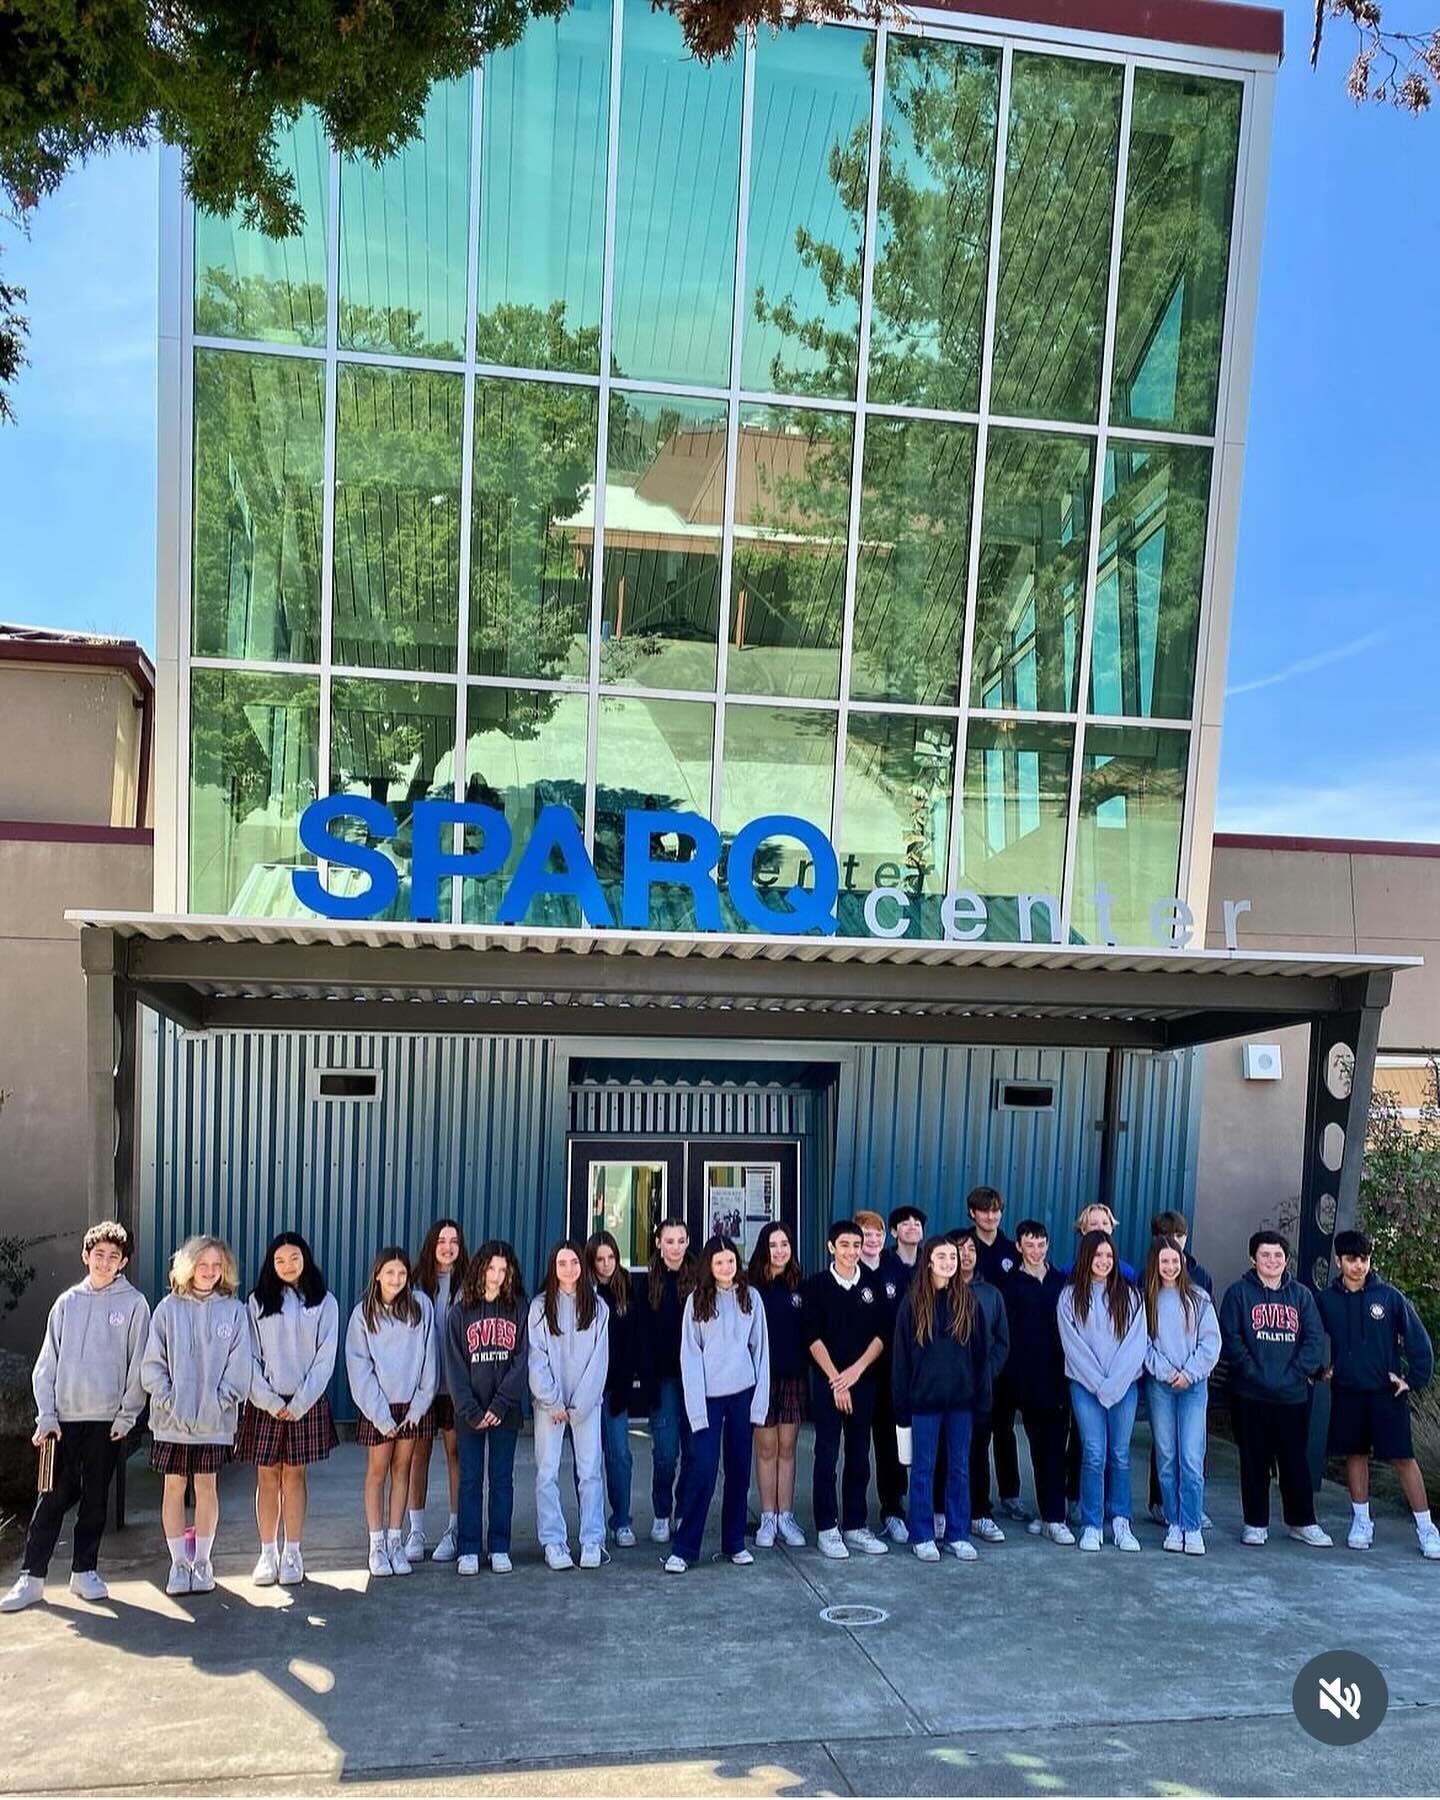 St Vincent de Paul 7th graders today at SPARQ for a planetarium show. Great group of curious kids from Petaluma. Thanks to teacher Elisa King for going out of their way! 🌟 🌎 
#sparqatphs #pinerhighschool